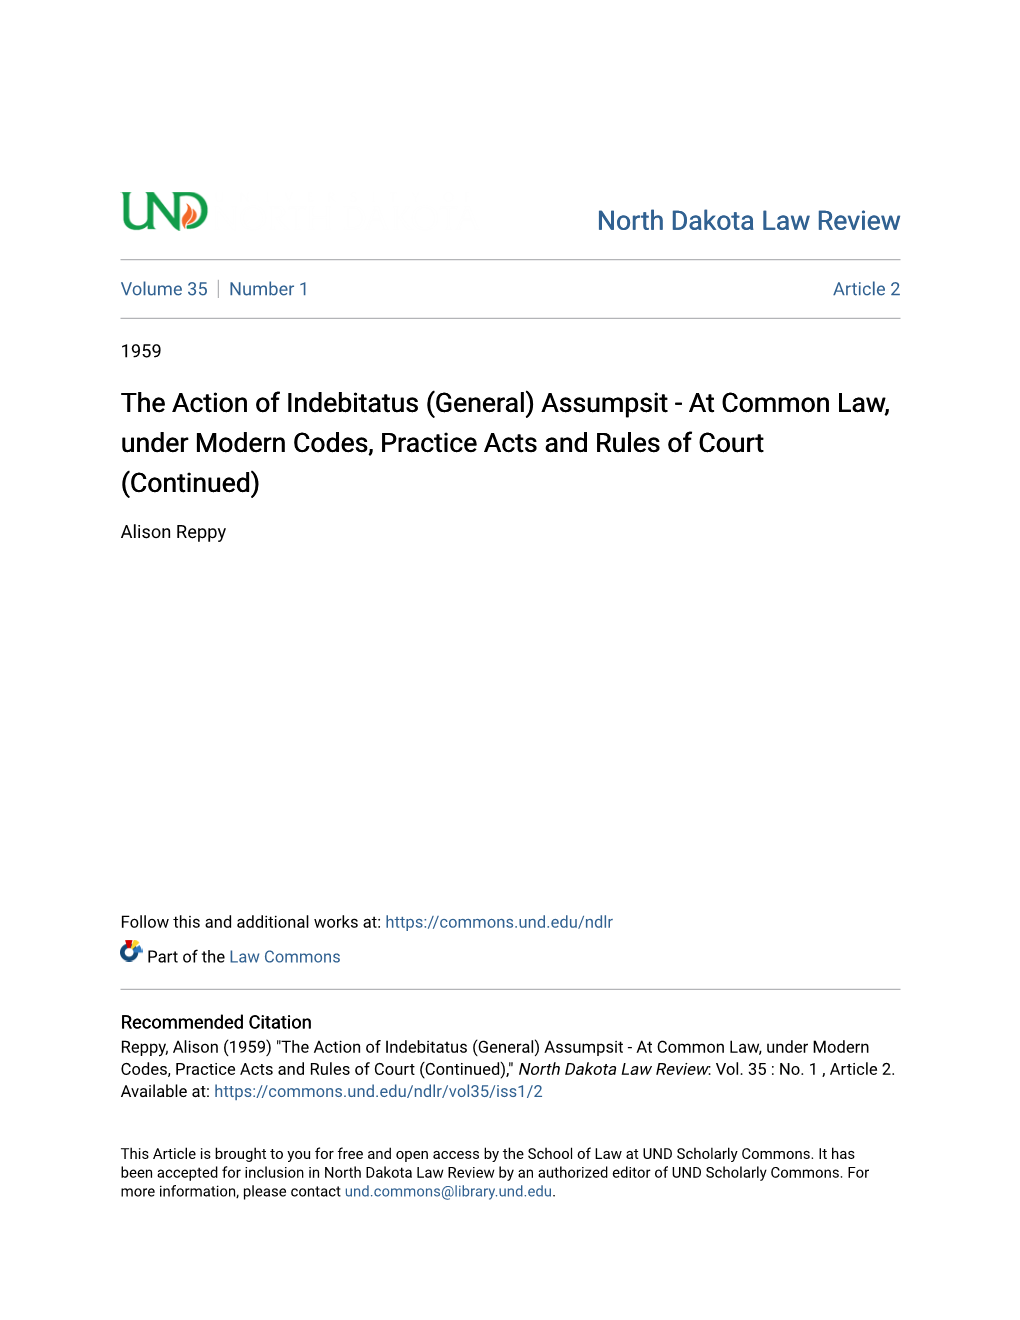 Assumpsit - at Common Law, Under Modern Codes, Practice Acts and Rules of Court (Continued)